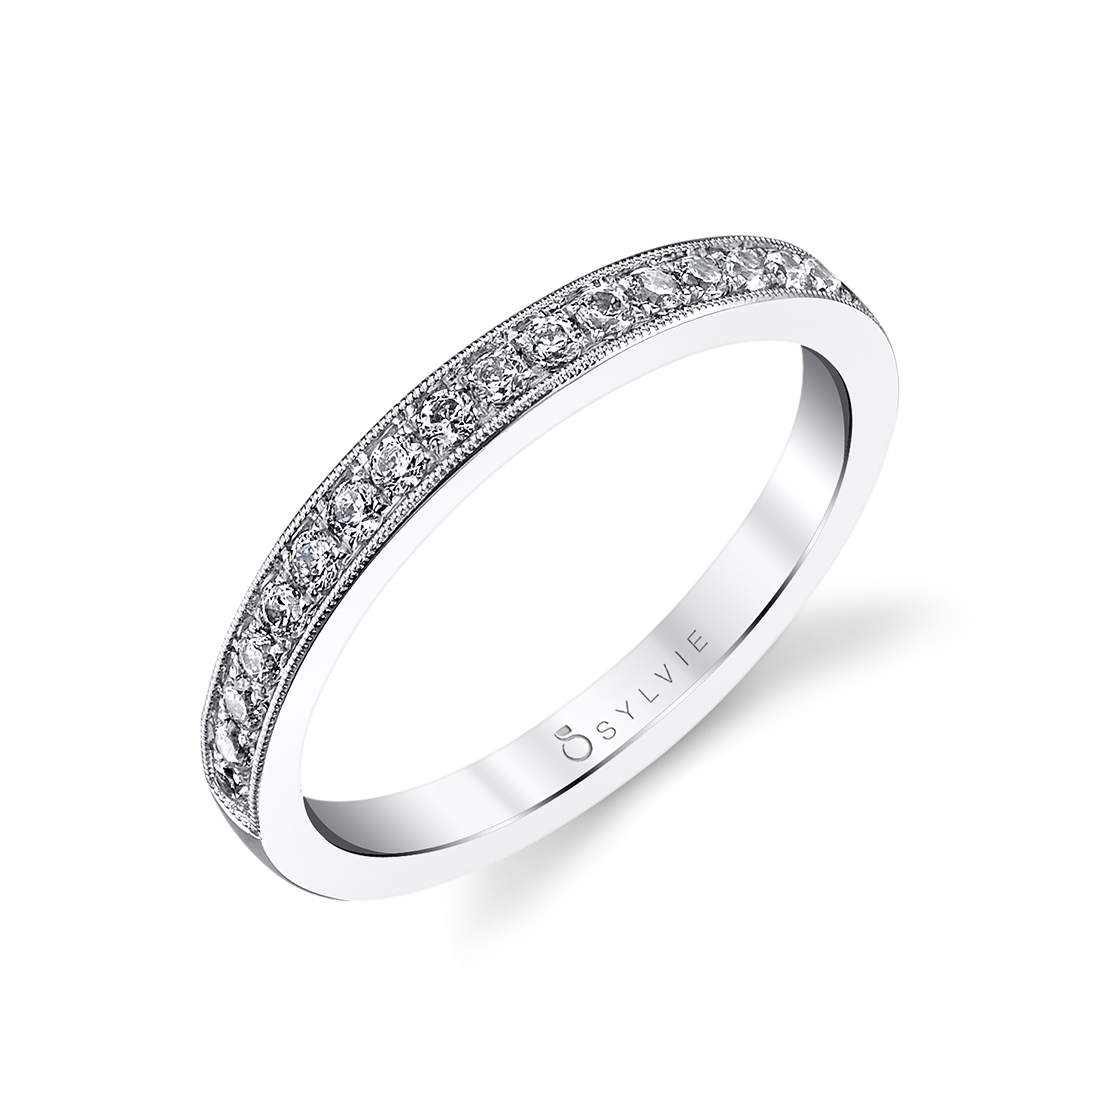 Classic Channel Set Wedding Band with Milgrain Detailing